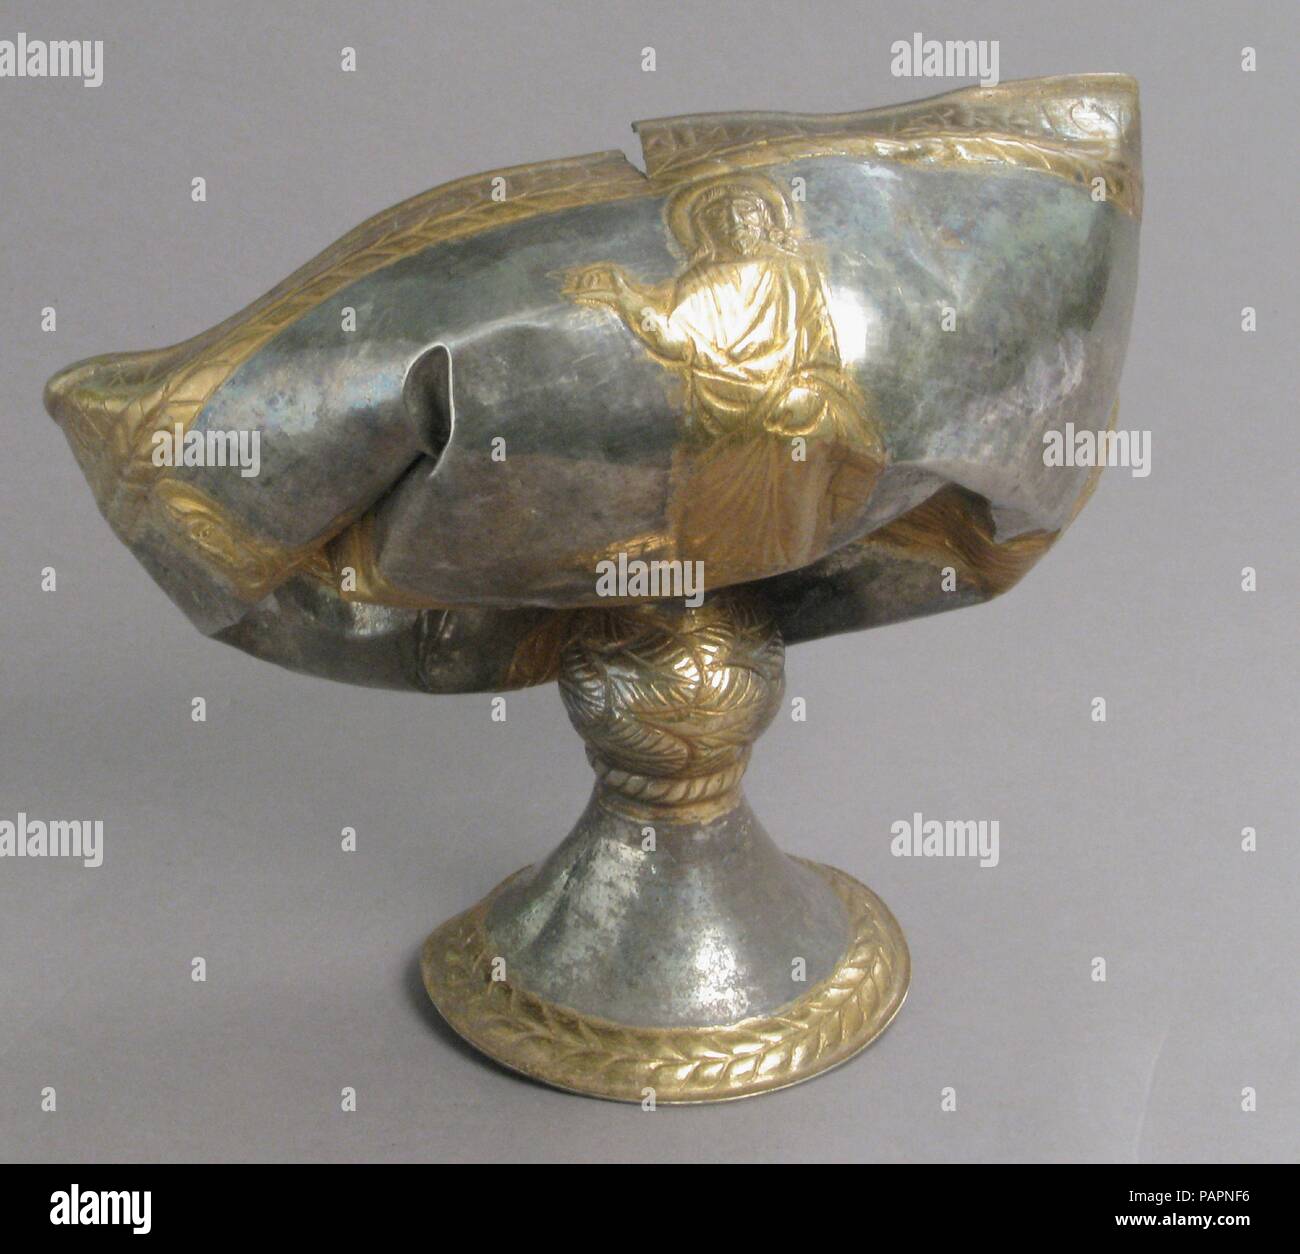 The Attarouthi Treasure - Chalice. Culture: Byzantine. Dimensions: Overall: 6 15/16 x 9 3/8 x 5 11/16 in. (17.6 x 23.8 x 14.4 cm)  Diam. of foot: 3 9/16 in. (9.1 cm)  Diam. of knop: 1 5/8 in. (4.2 cm). Date: 500-650.  These well-wrought liturgical objects-chalices, censers, a strainer, and a representation of the dove of the Holy Spirit-were among the possessions of a Christian church in the affluent merchant town of Attarouthi in Syria, then one of the richest lands of the Byzantine empire. The chalices, censers, and strainer were used for the Divine Liturgy, or Eucharist service, in which Ch Stock Photo